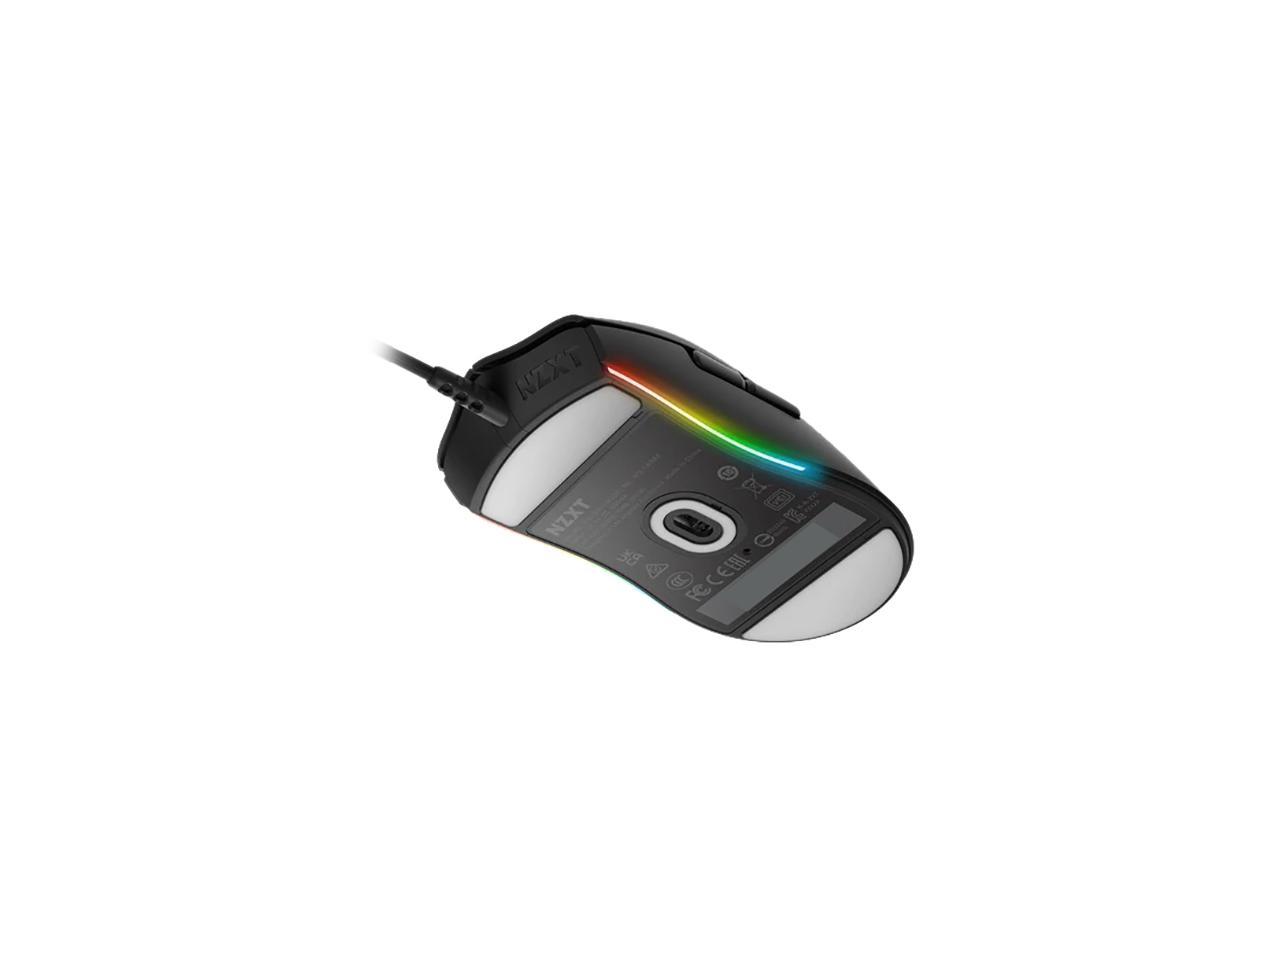 NZXT Lift - MS-1WRAX-BM - PC Gaming Mouse - Lightweight Ambidextrous Mouse - High-end PixArt